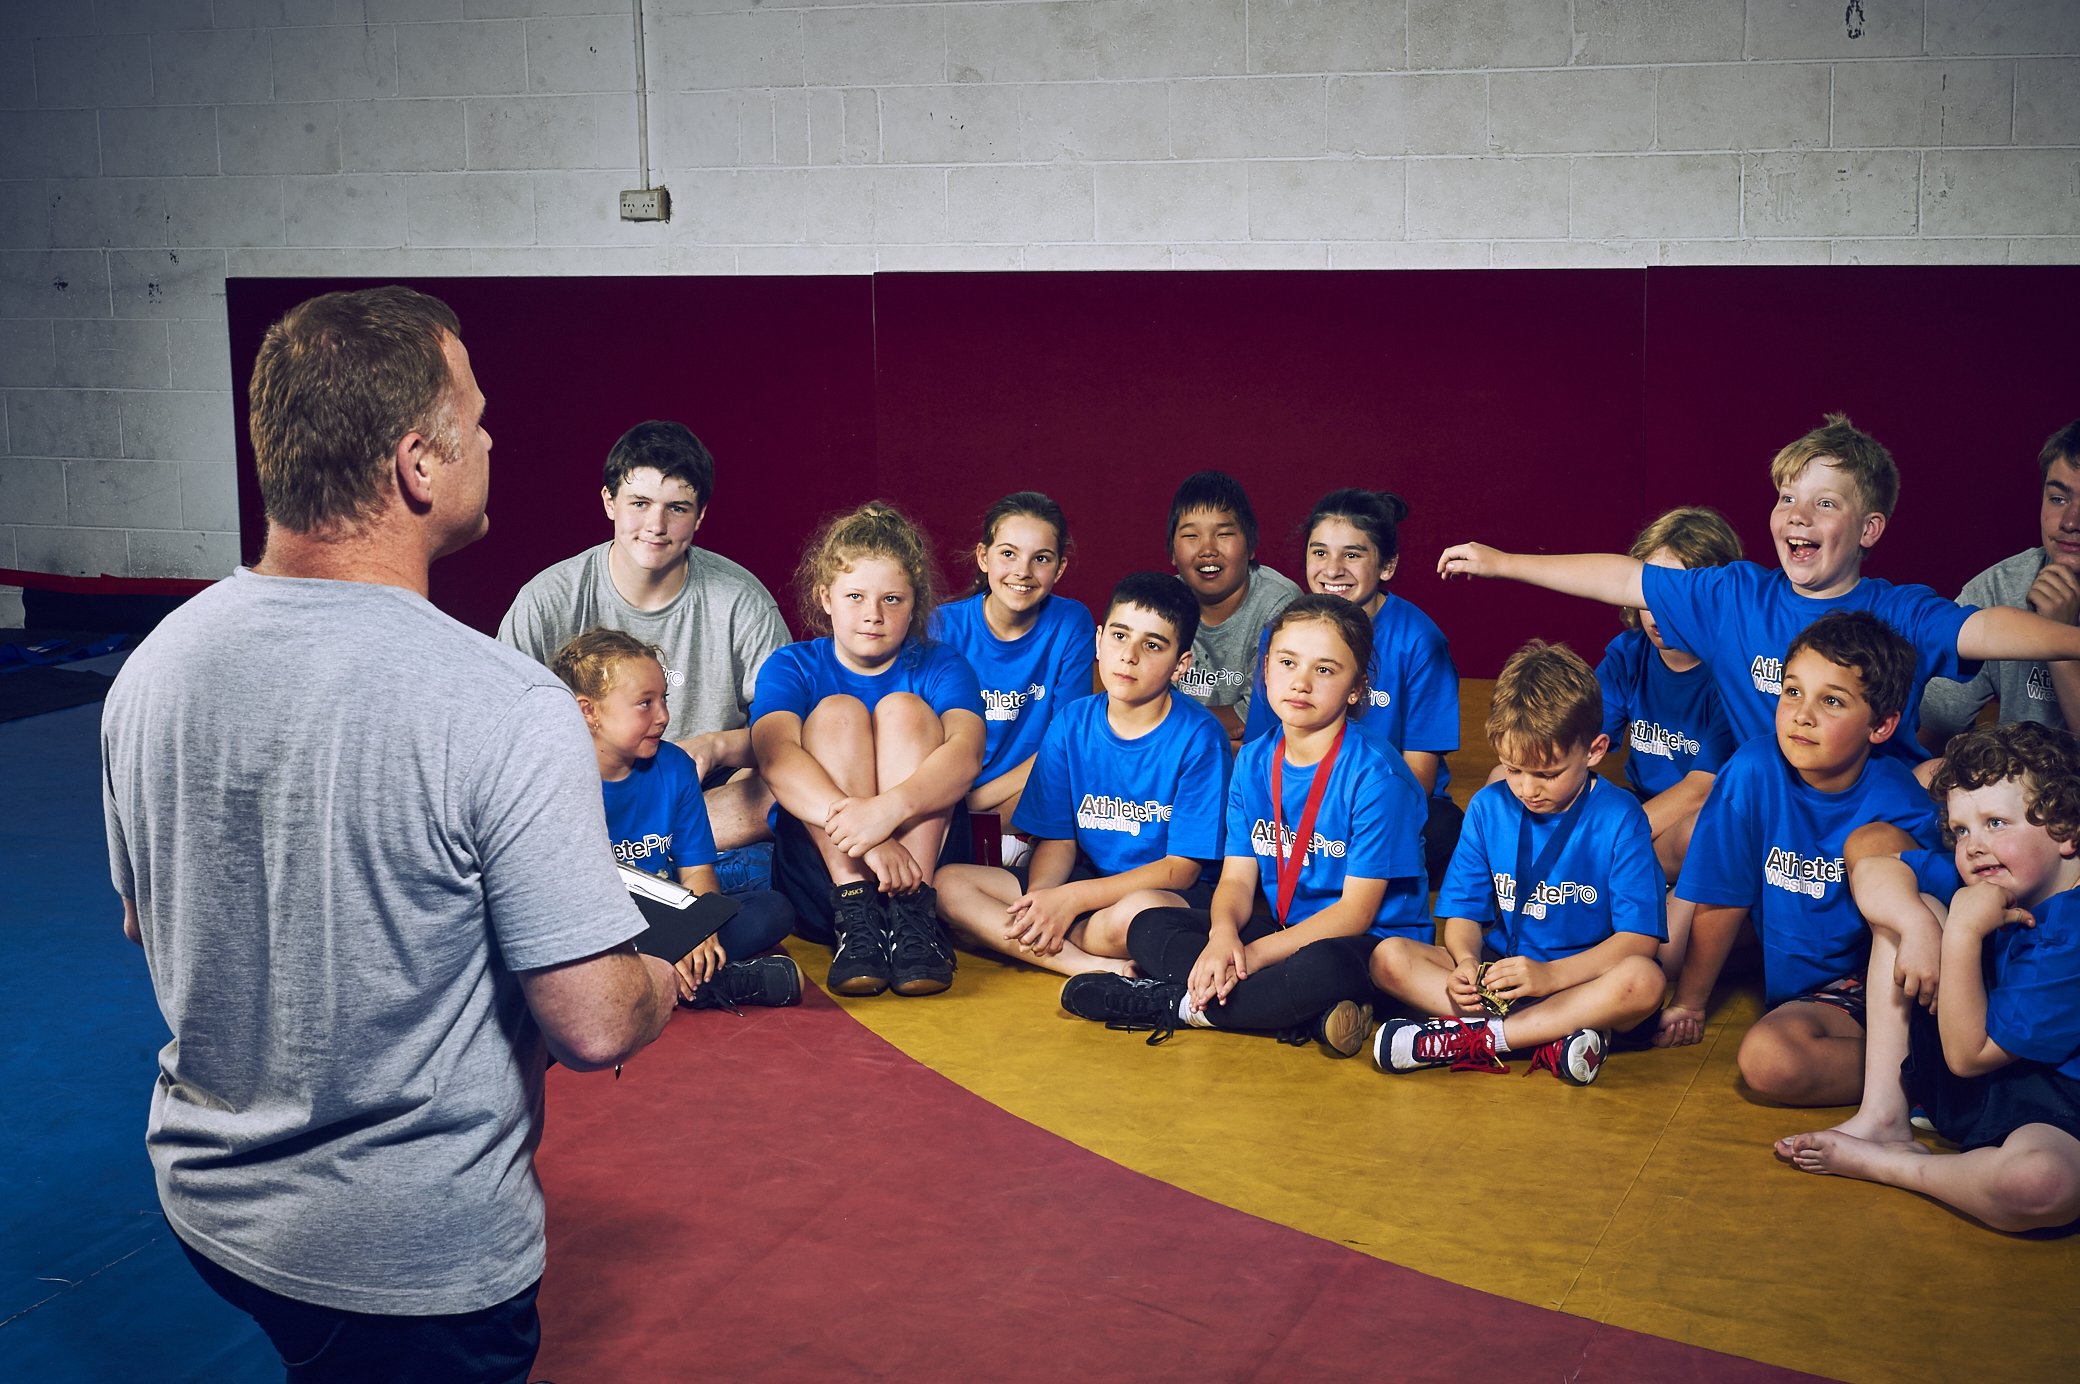 Athlete Pro RW Richard Weiss young rookie coach teacher wrestling greco roman freestyle olympic